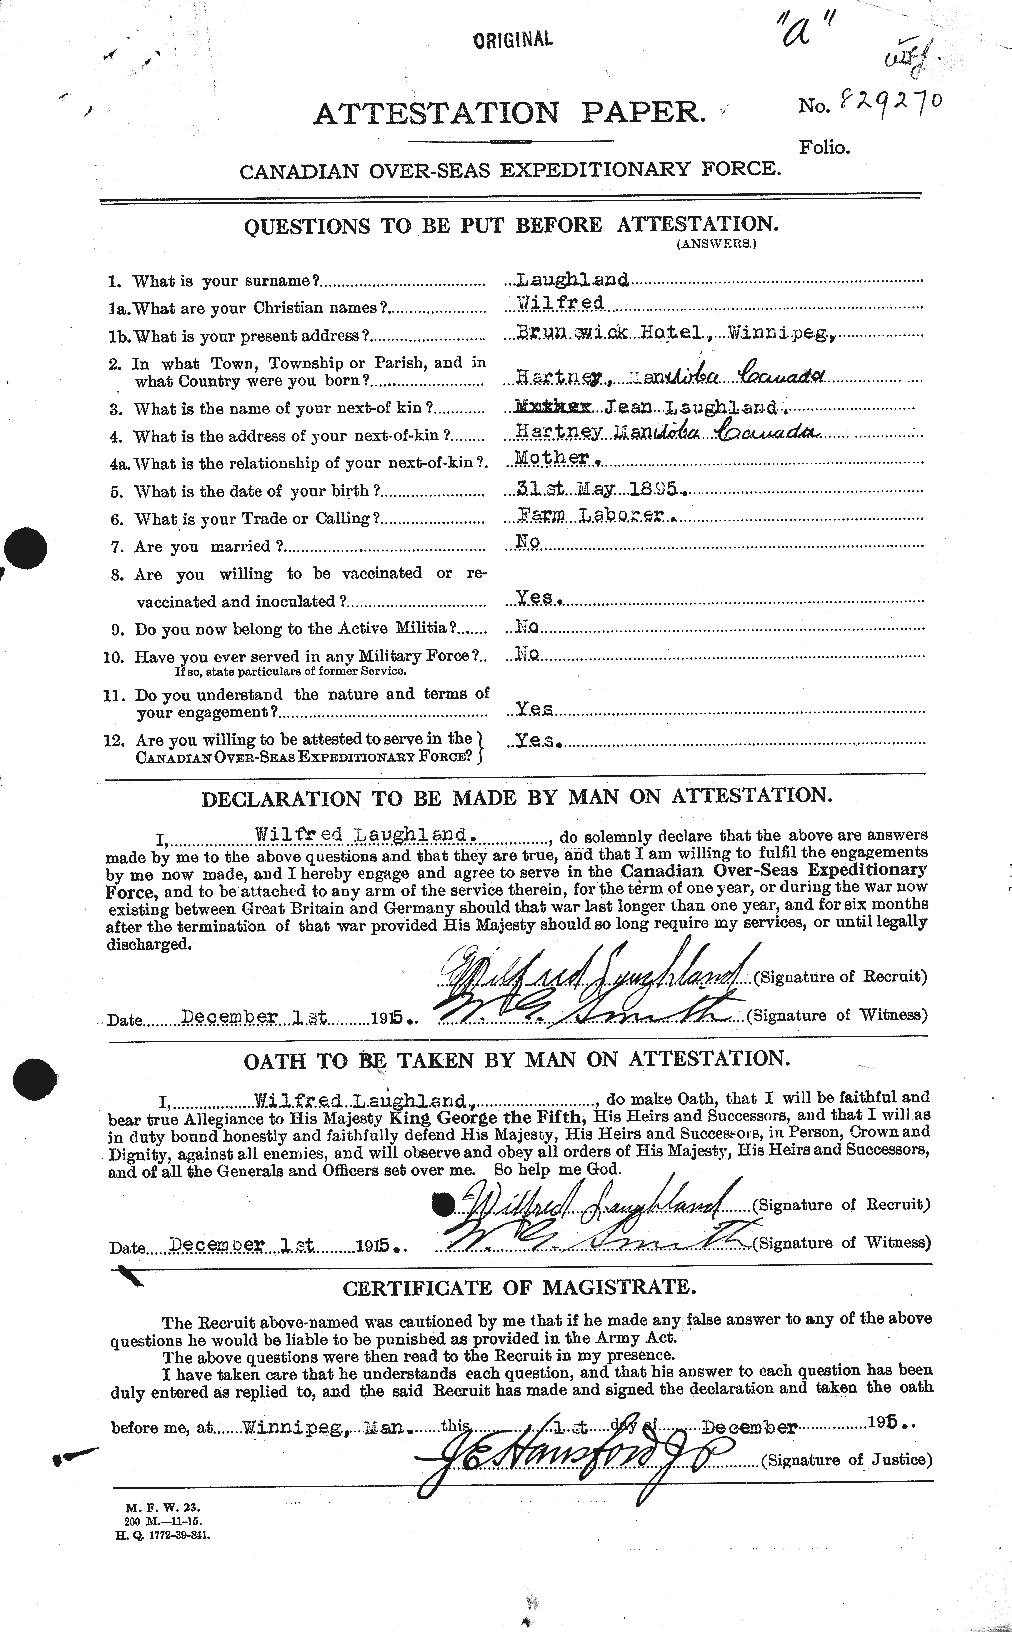 Personnel Records of the First World War - CEF 450542a